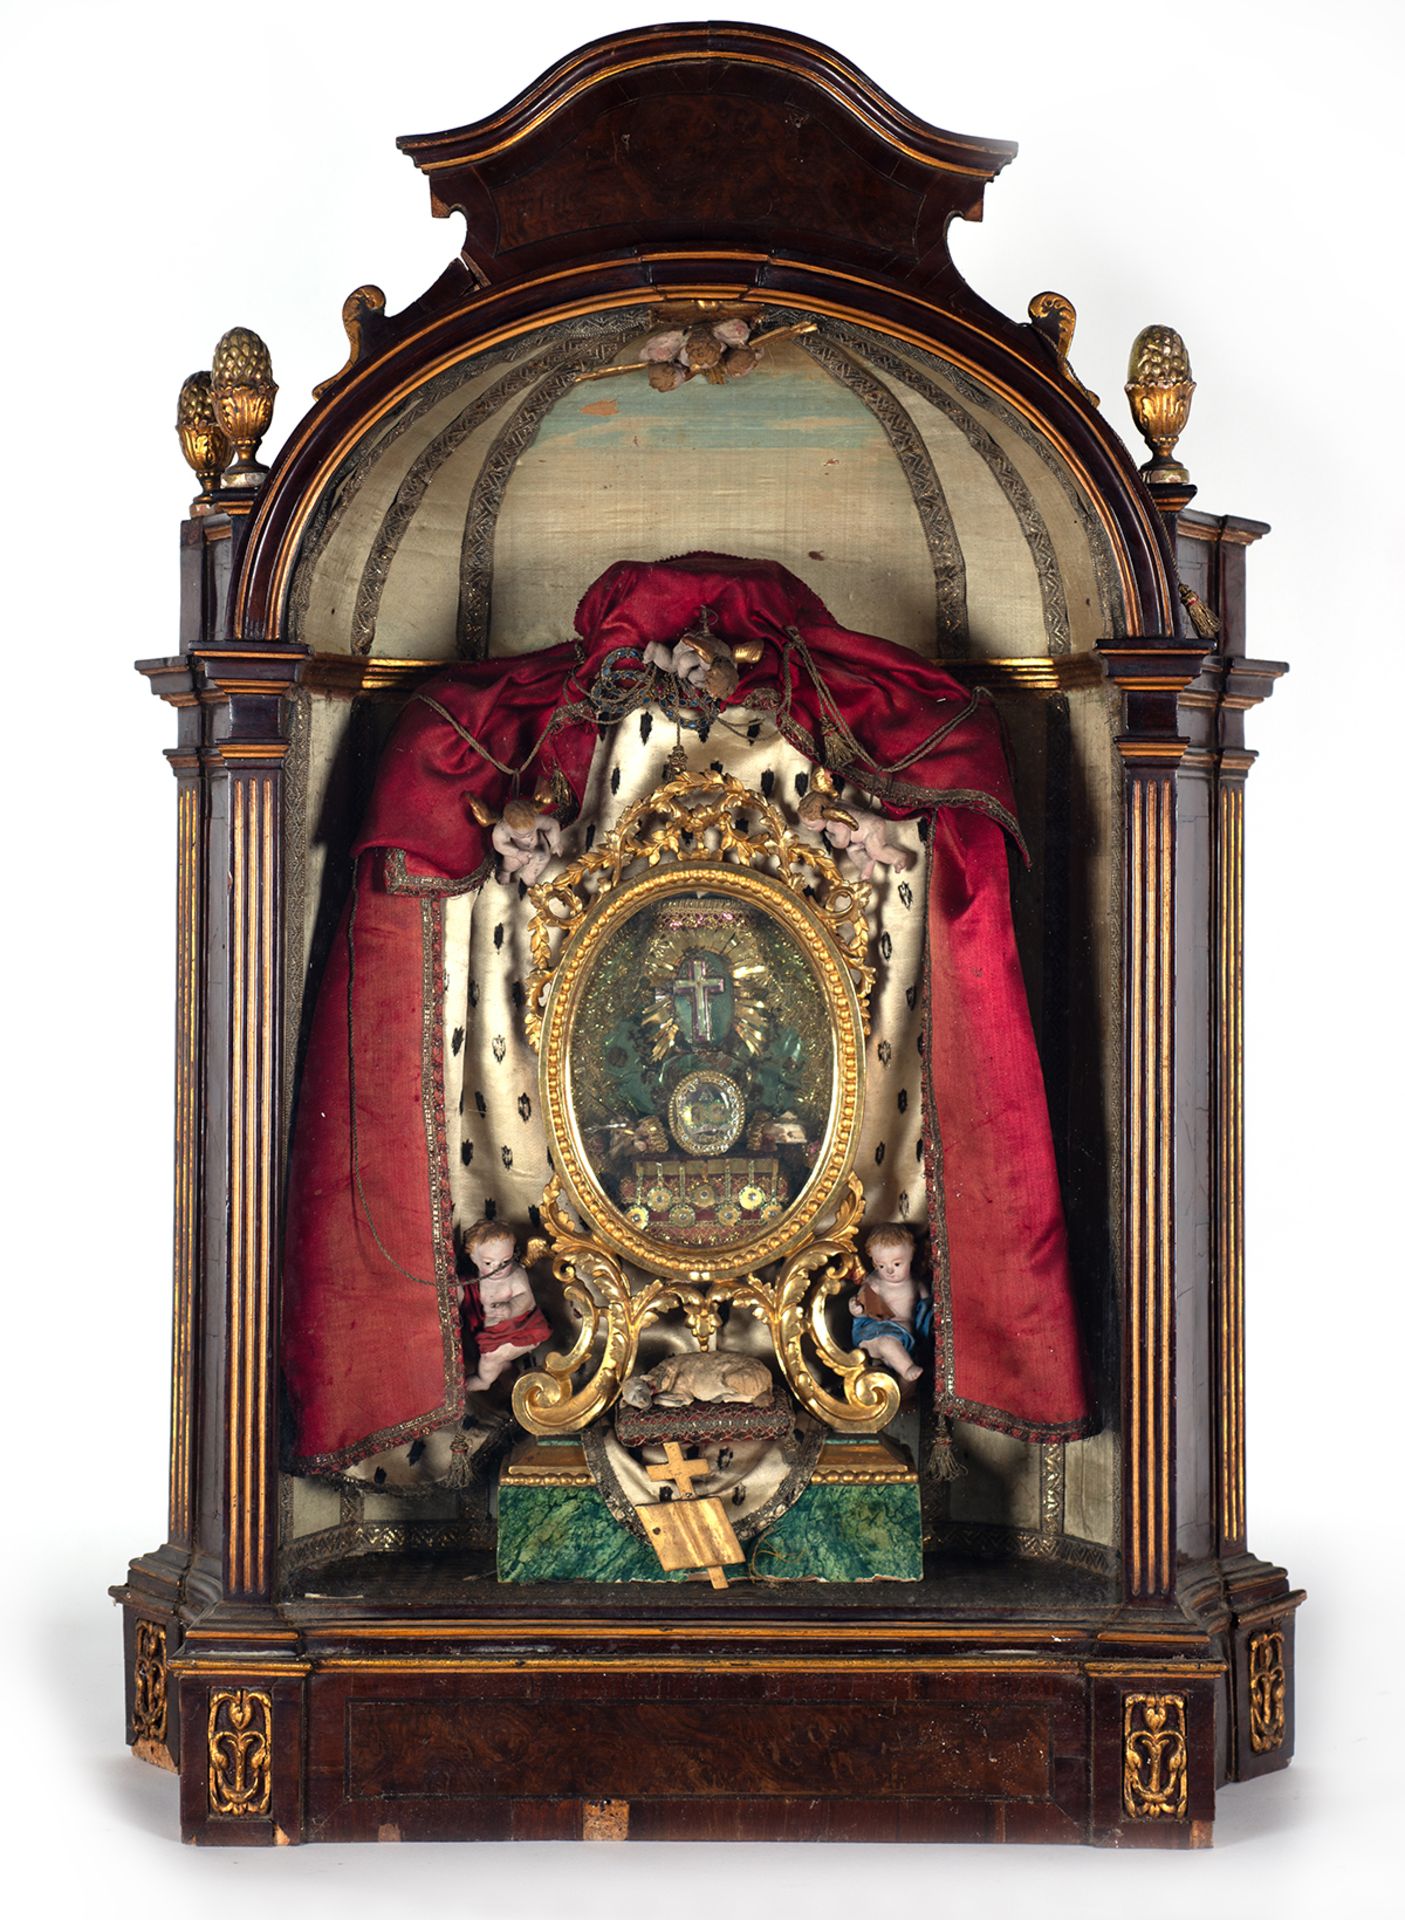 Large Mallorcan reliquary, 18th century